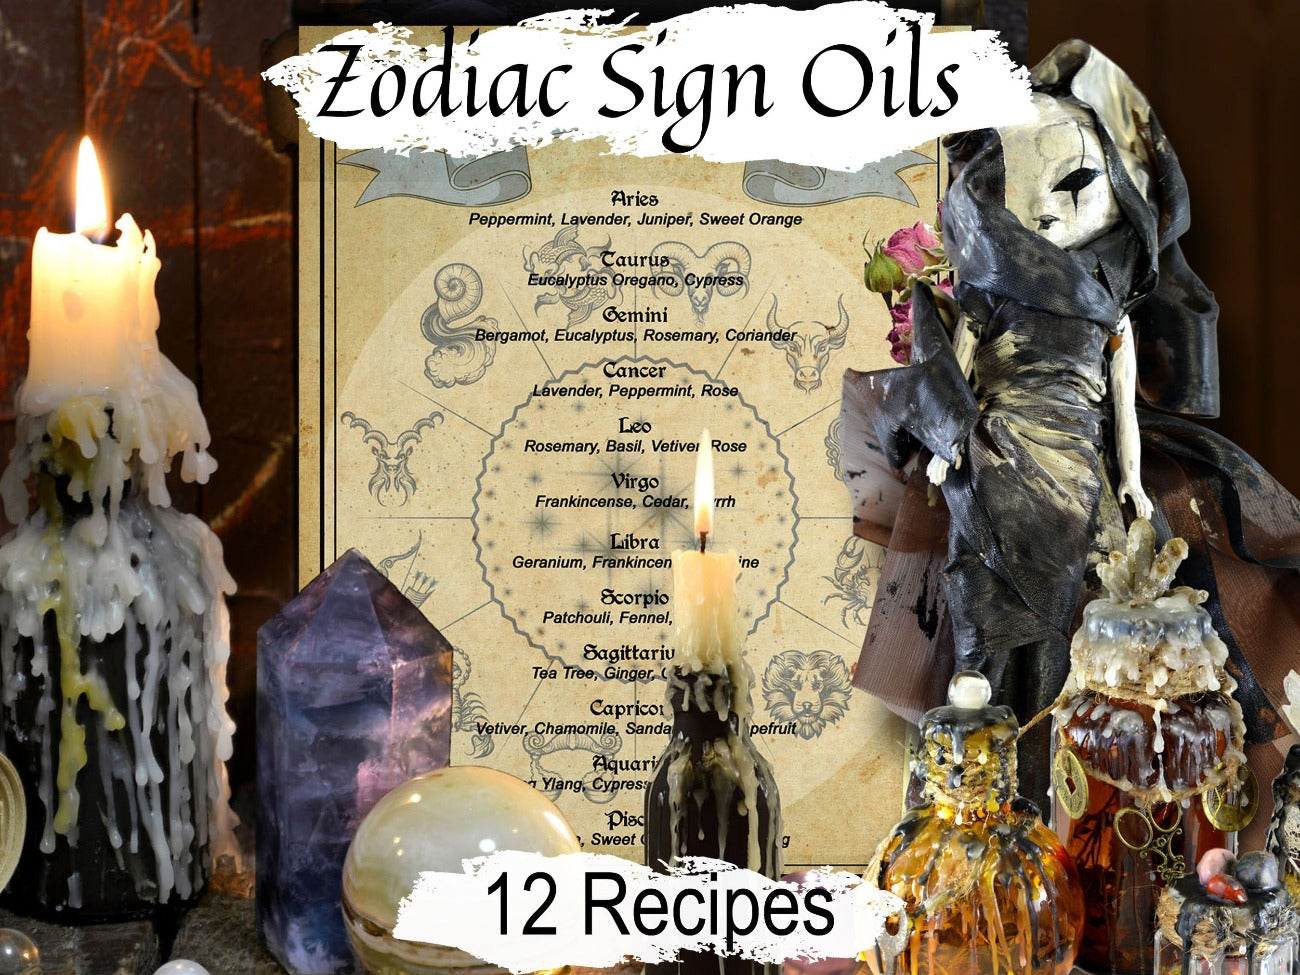 ASTROLOGY OIL, Zodiac Oil Recipes Aromatherapy, Elemental Earth, Air, Fire, Water Oils, Birth Sign Oils, Wicca Witchcraft Aromatherapy BOS - Morgana Magick Spell